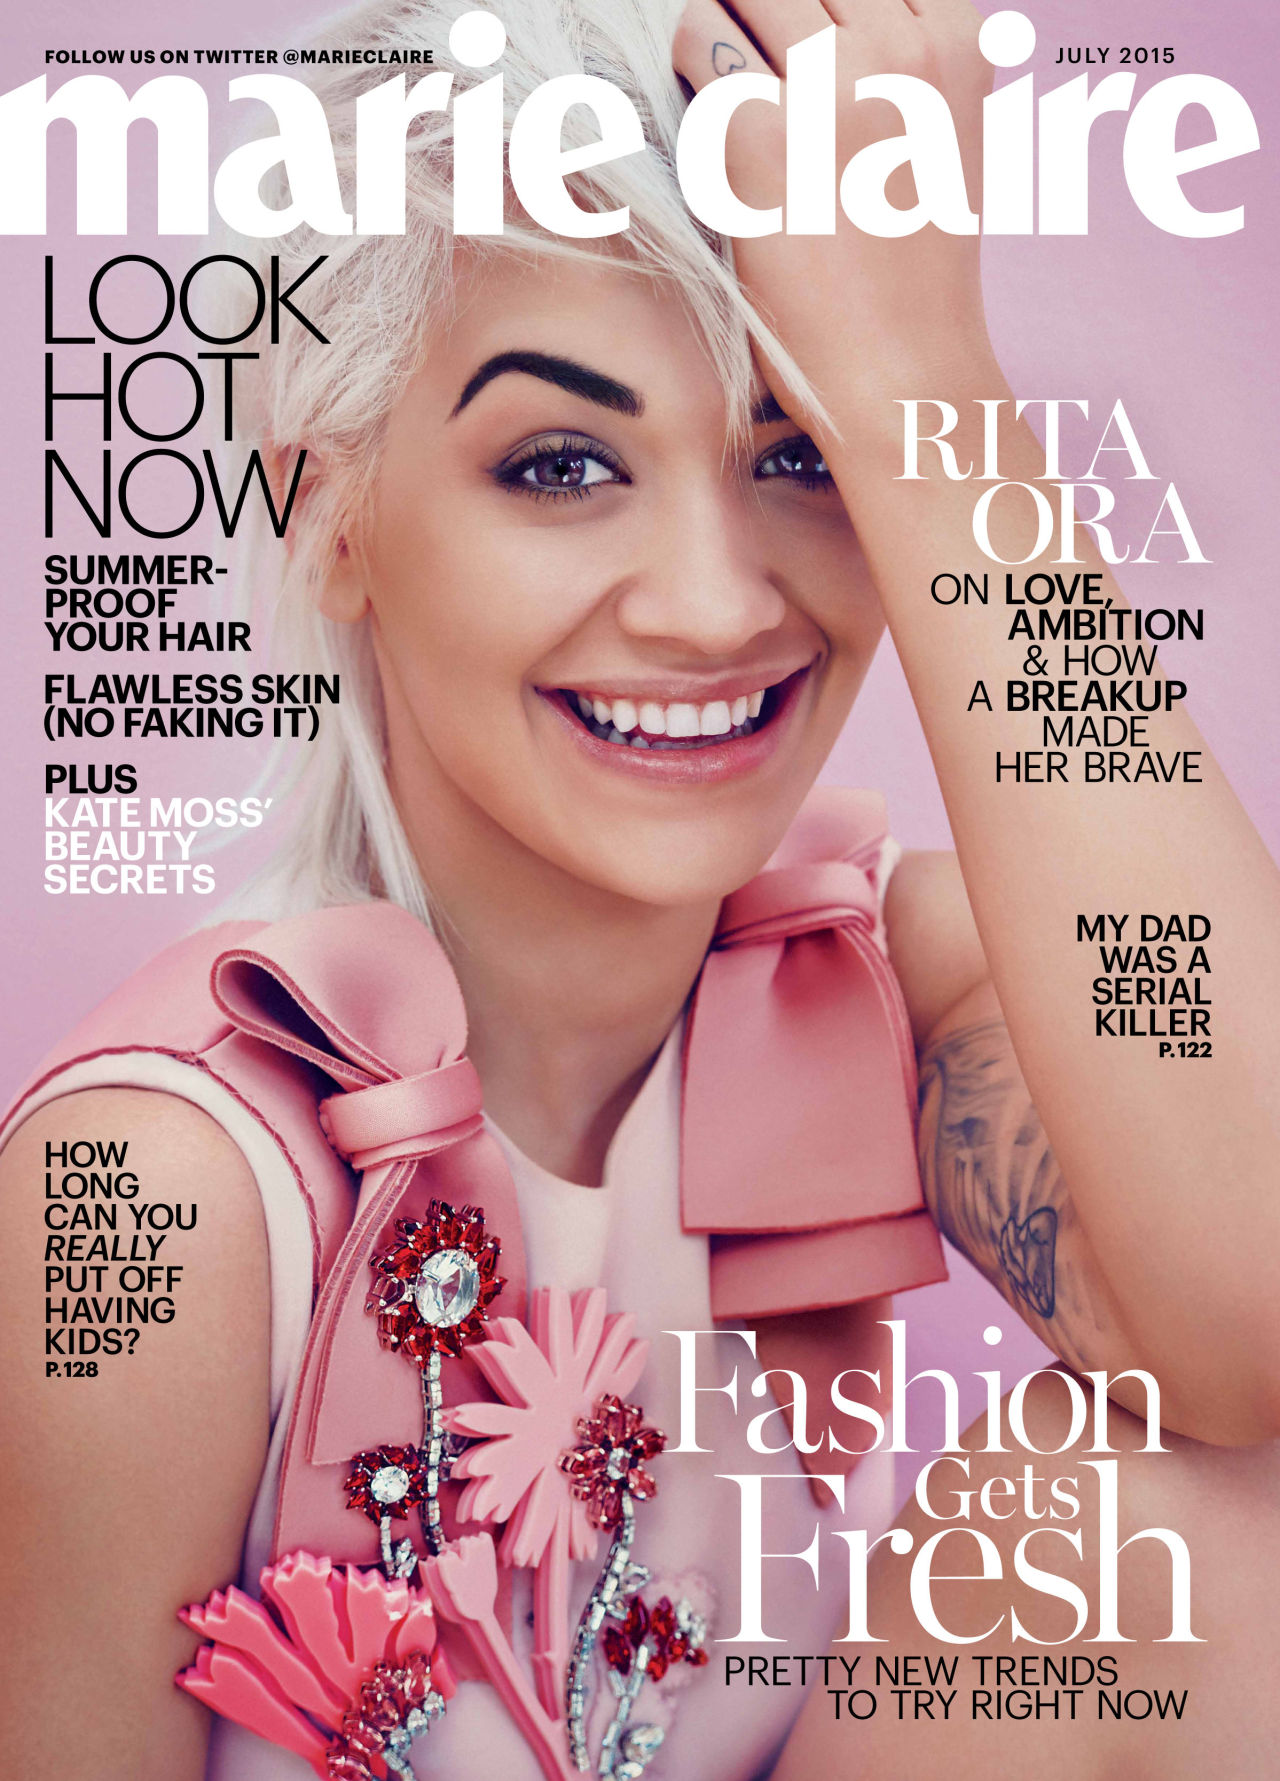 Rita Ora Covers Marie Claire July 2015 Issue.